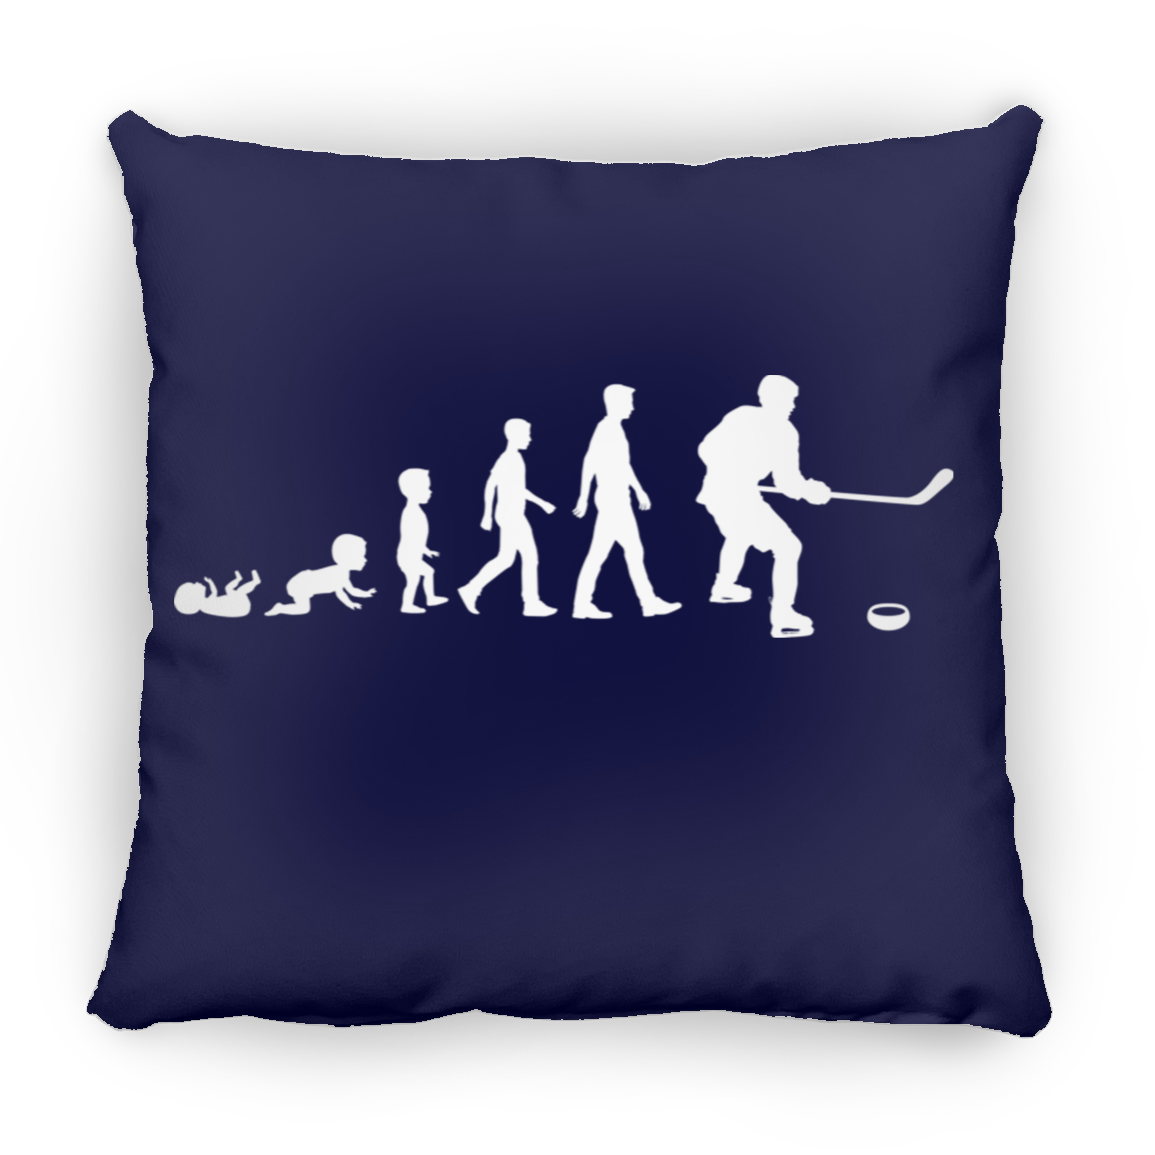 Growing up Hockey- Large Square Pillow